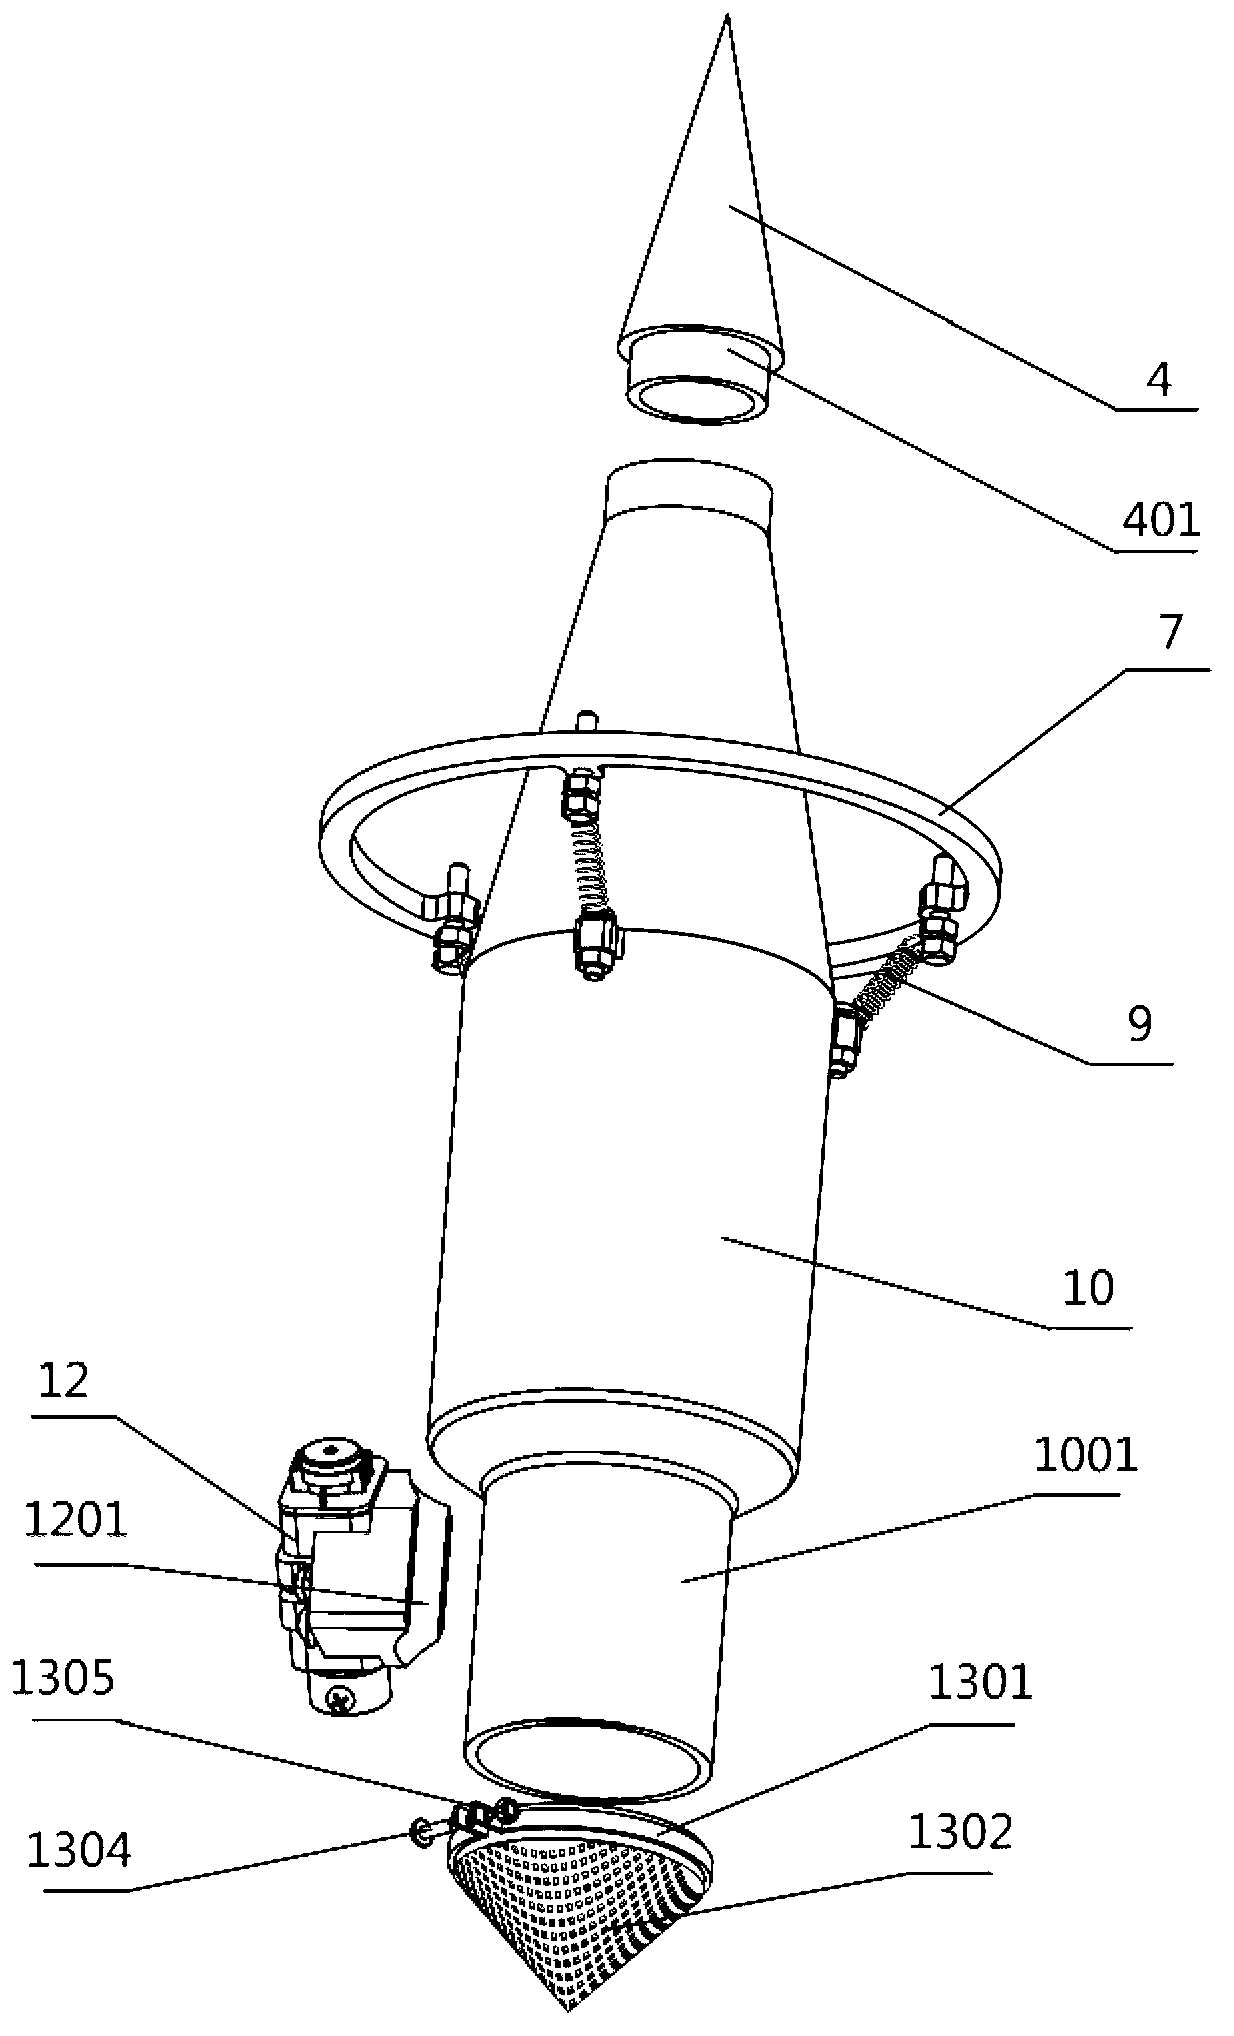 Device for generating gas-nanoparticle two-phase uniform fluid